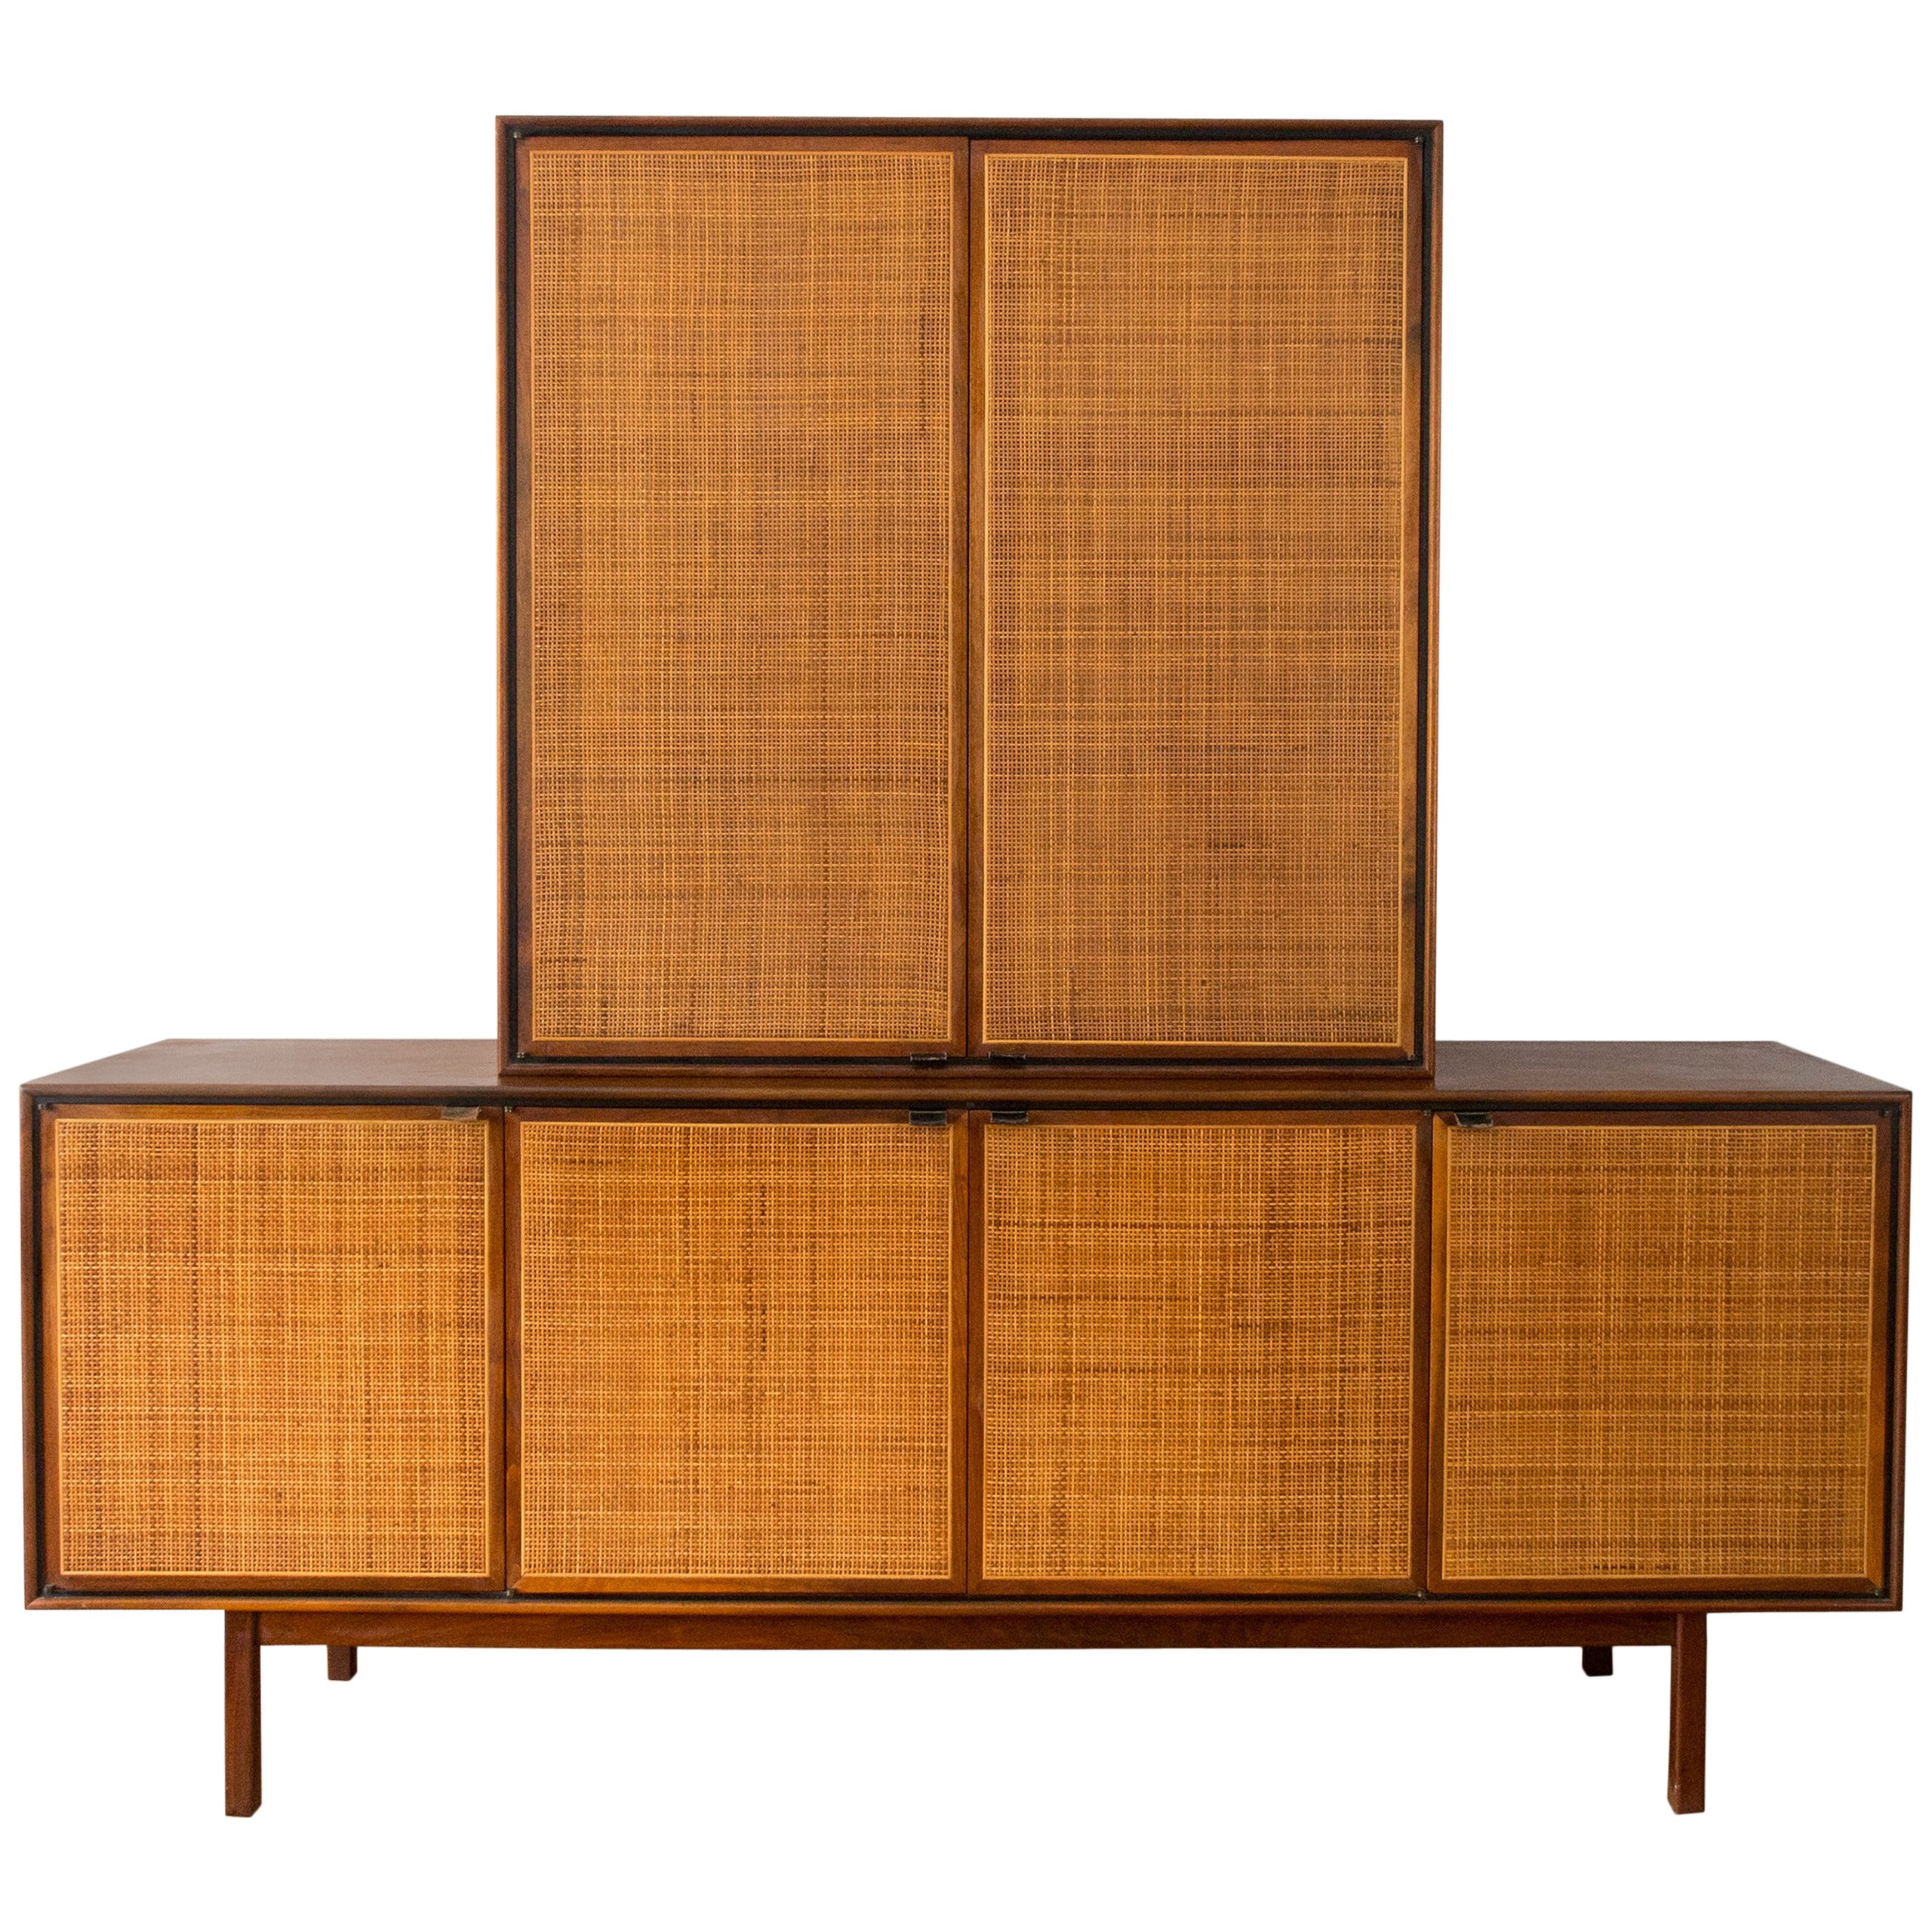 Florence Knoll Attributed Founders Walnut Cane Credenza Cabinet